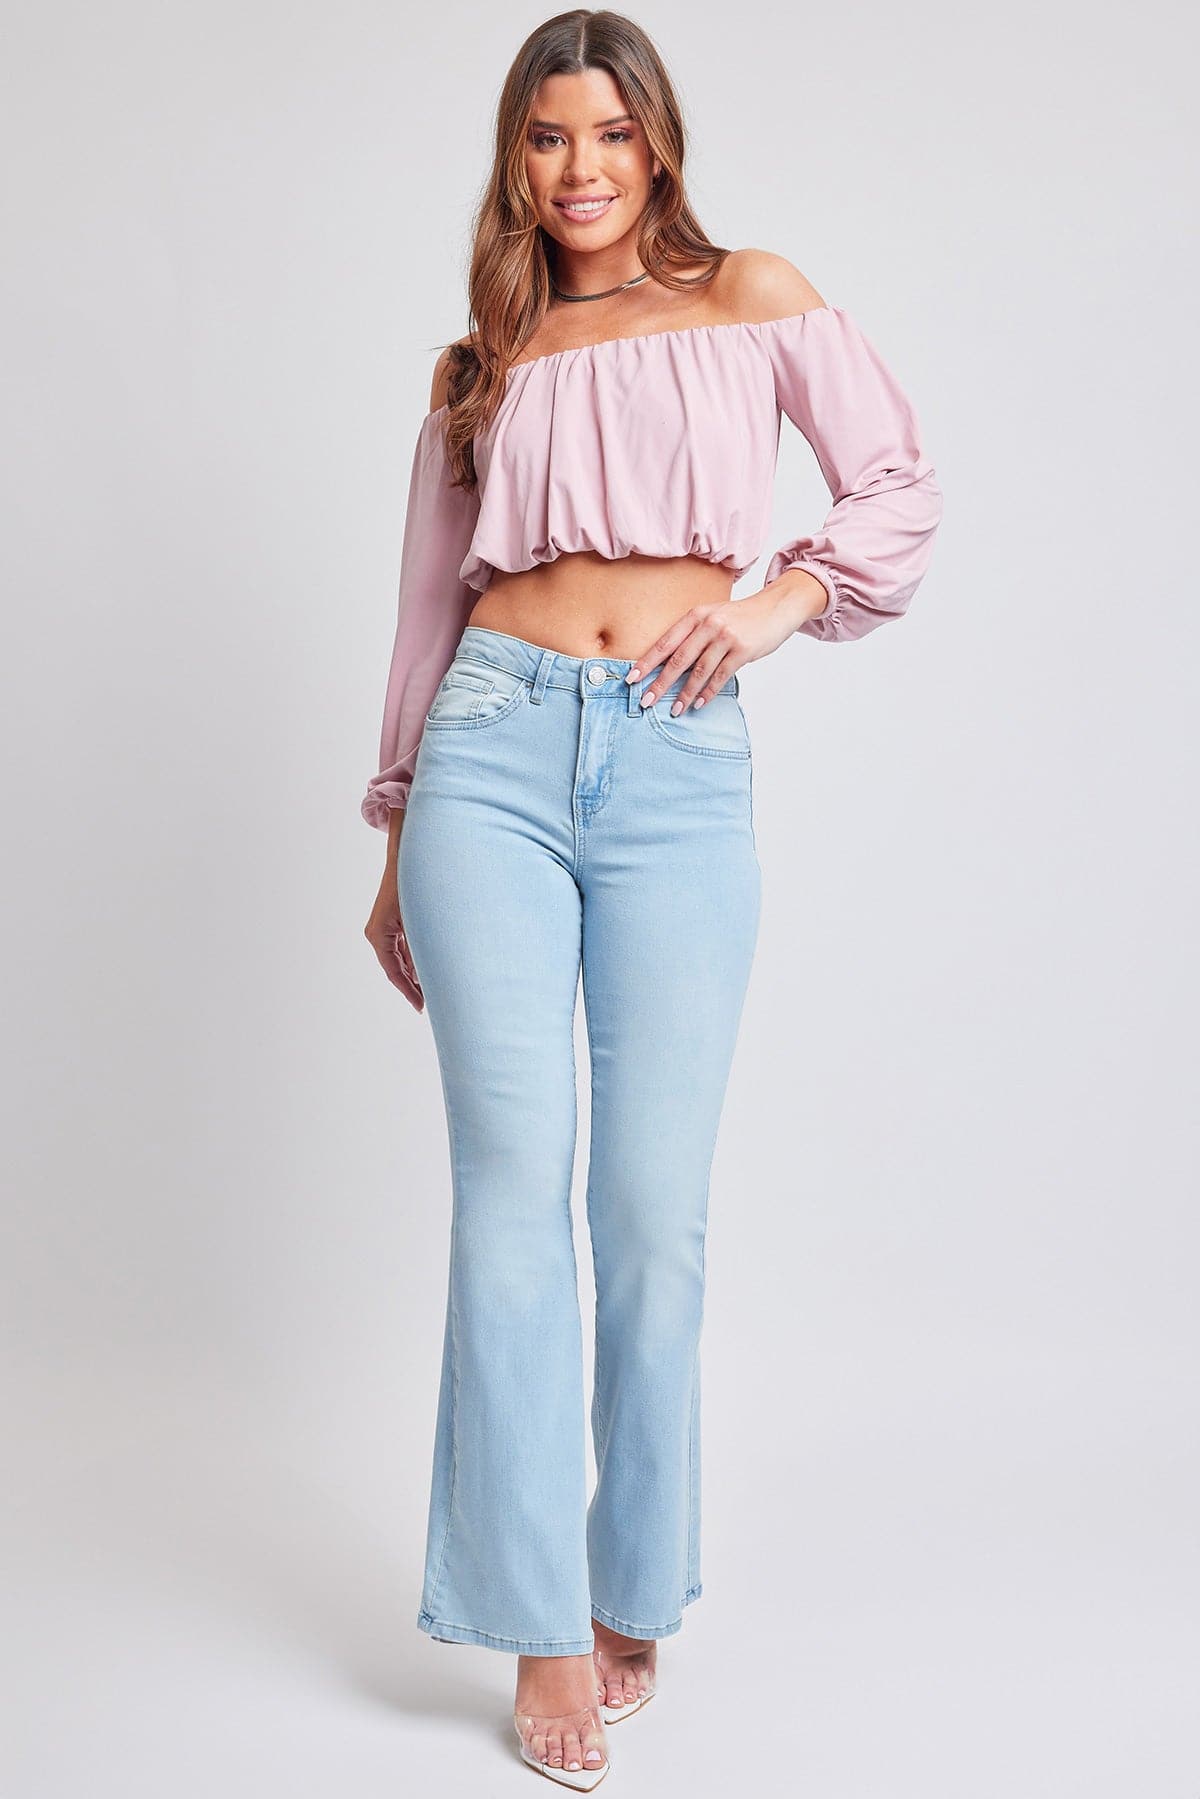 Women's Essential Non-Distressed Flare Jeans